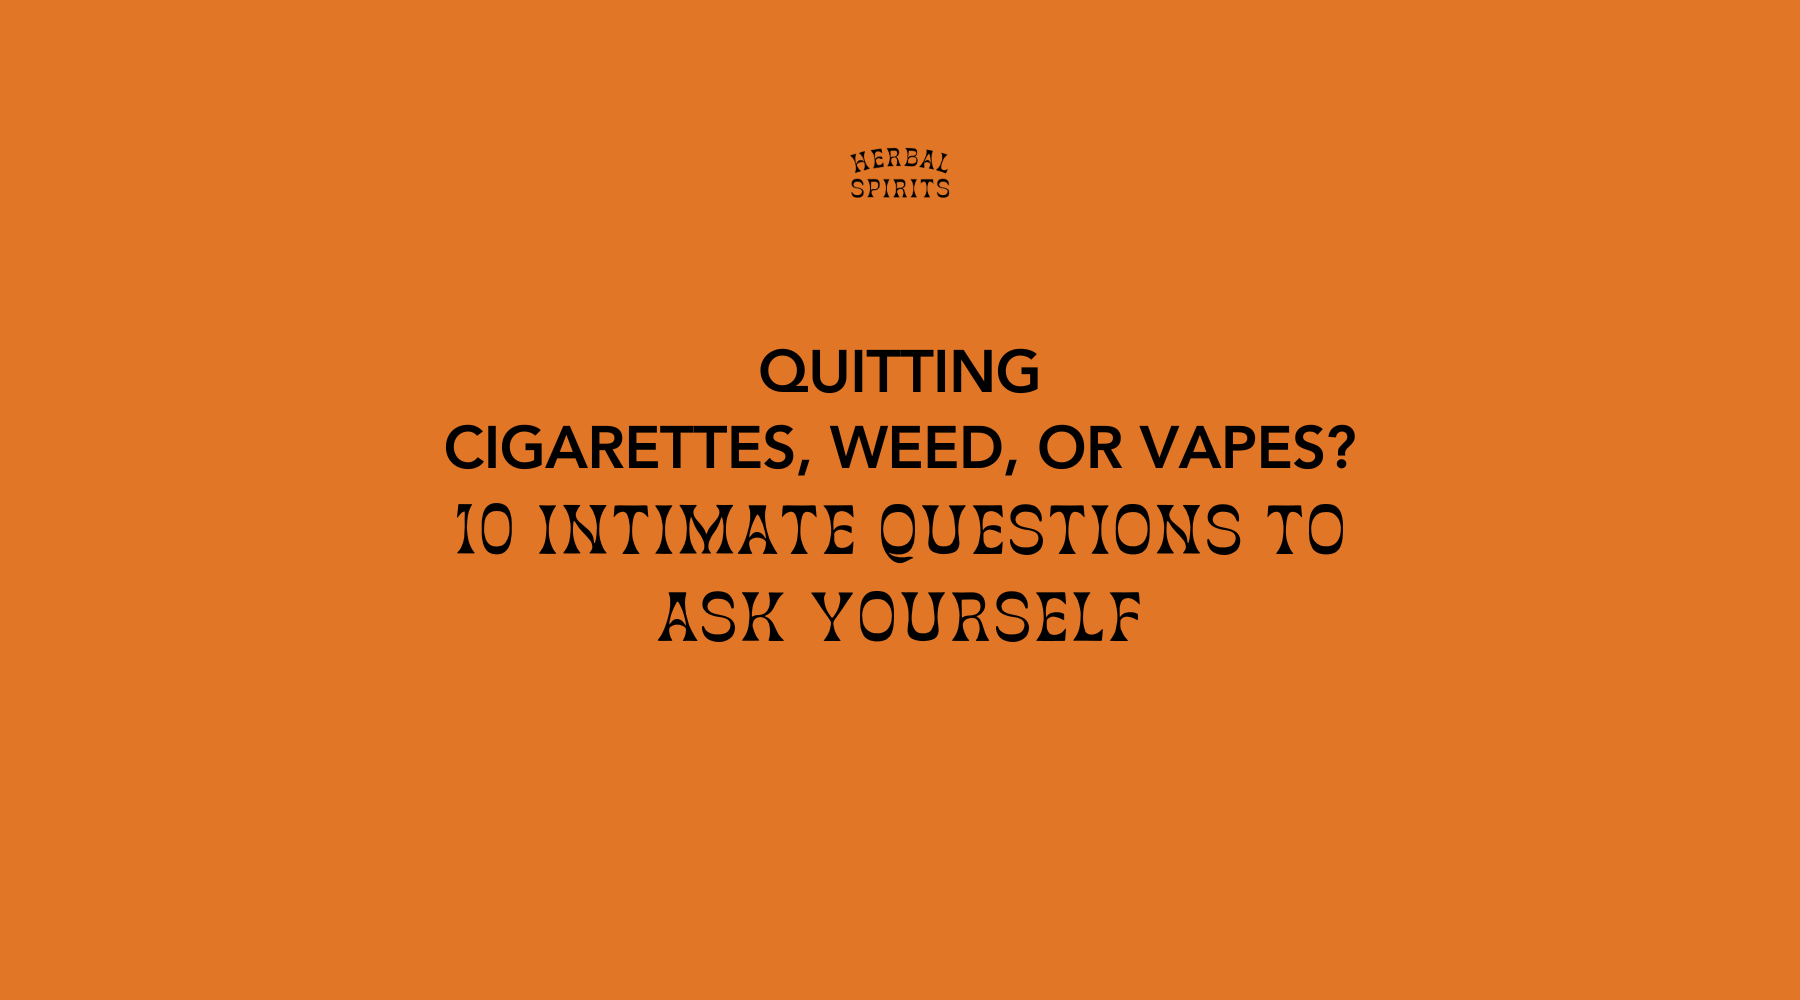 10 Intimate Questions To Ask Yourself When Quitting Cigarettes, Weed, Or Vapes Using Herbal Smoke Blends